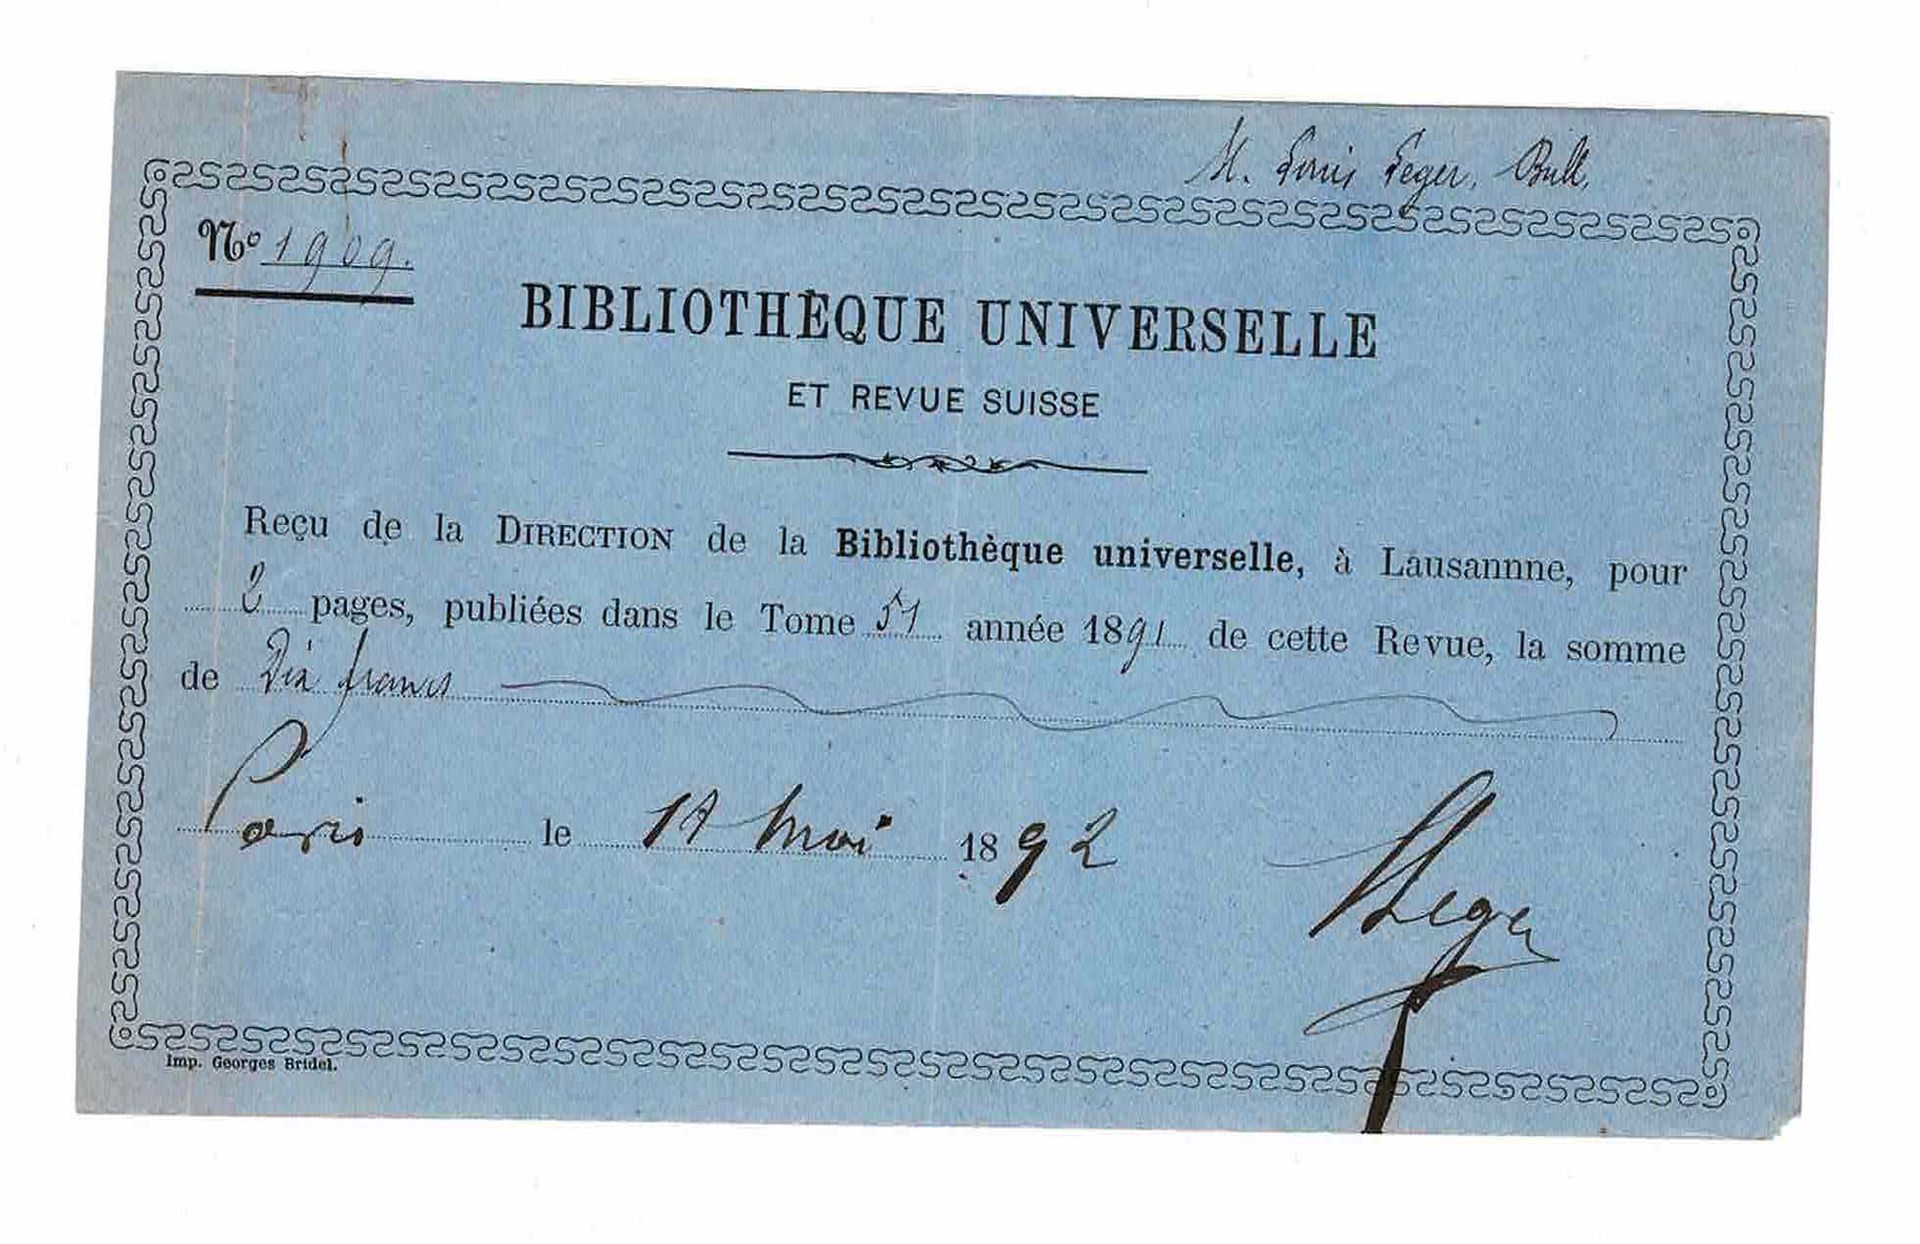 LITERATURE - LEGER Louis (1843 - 1923) - Receipt with signature French academic,&hellip;